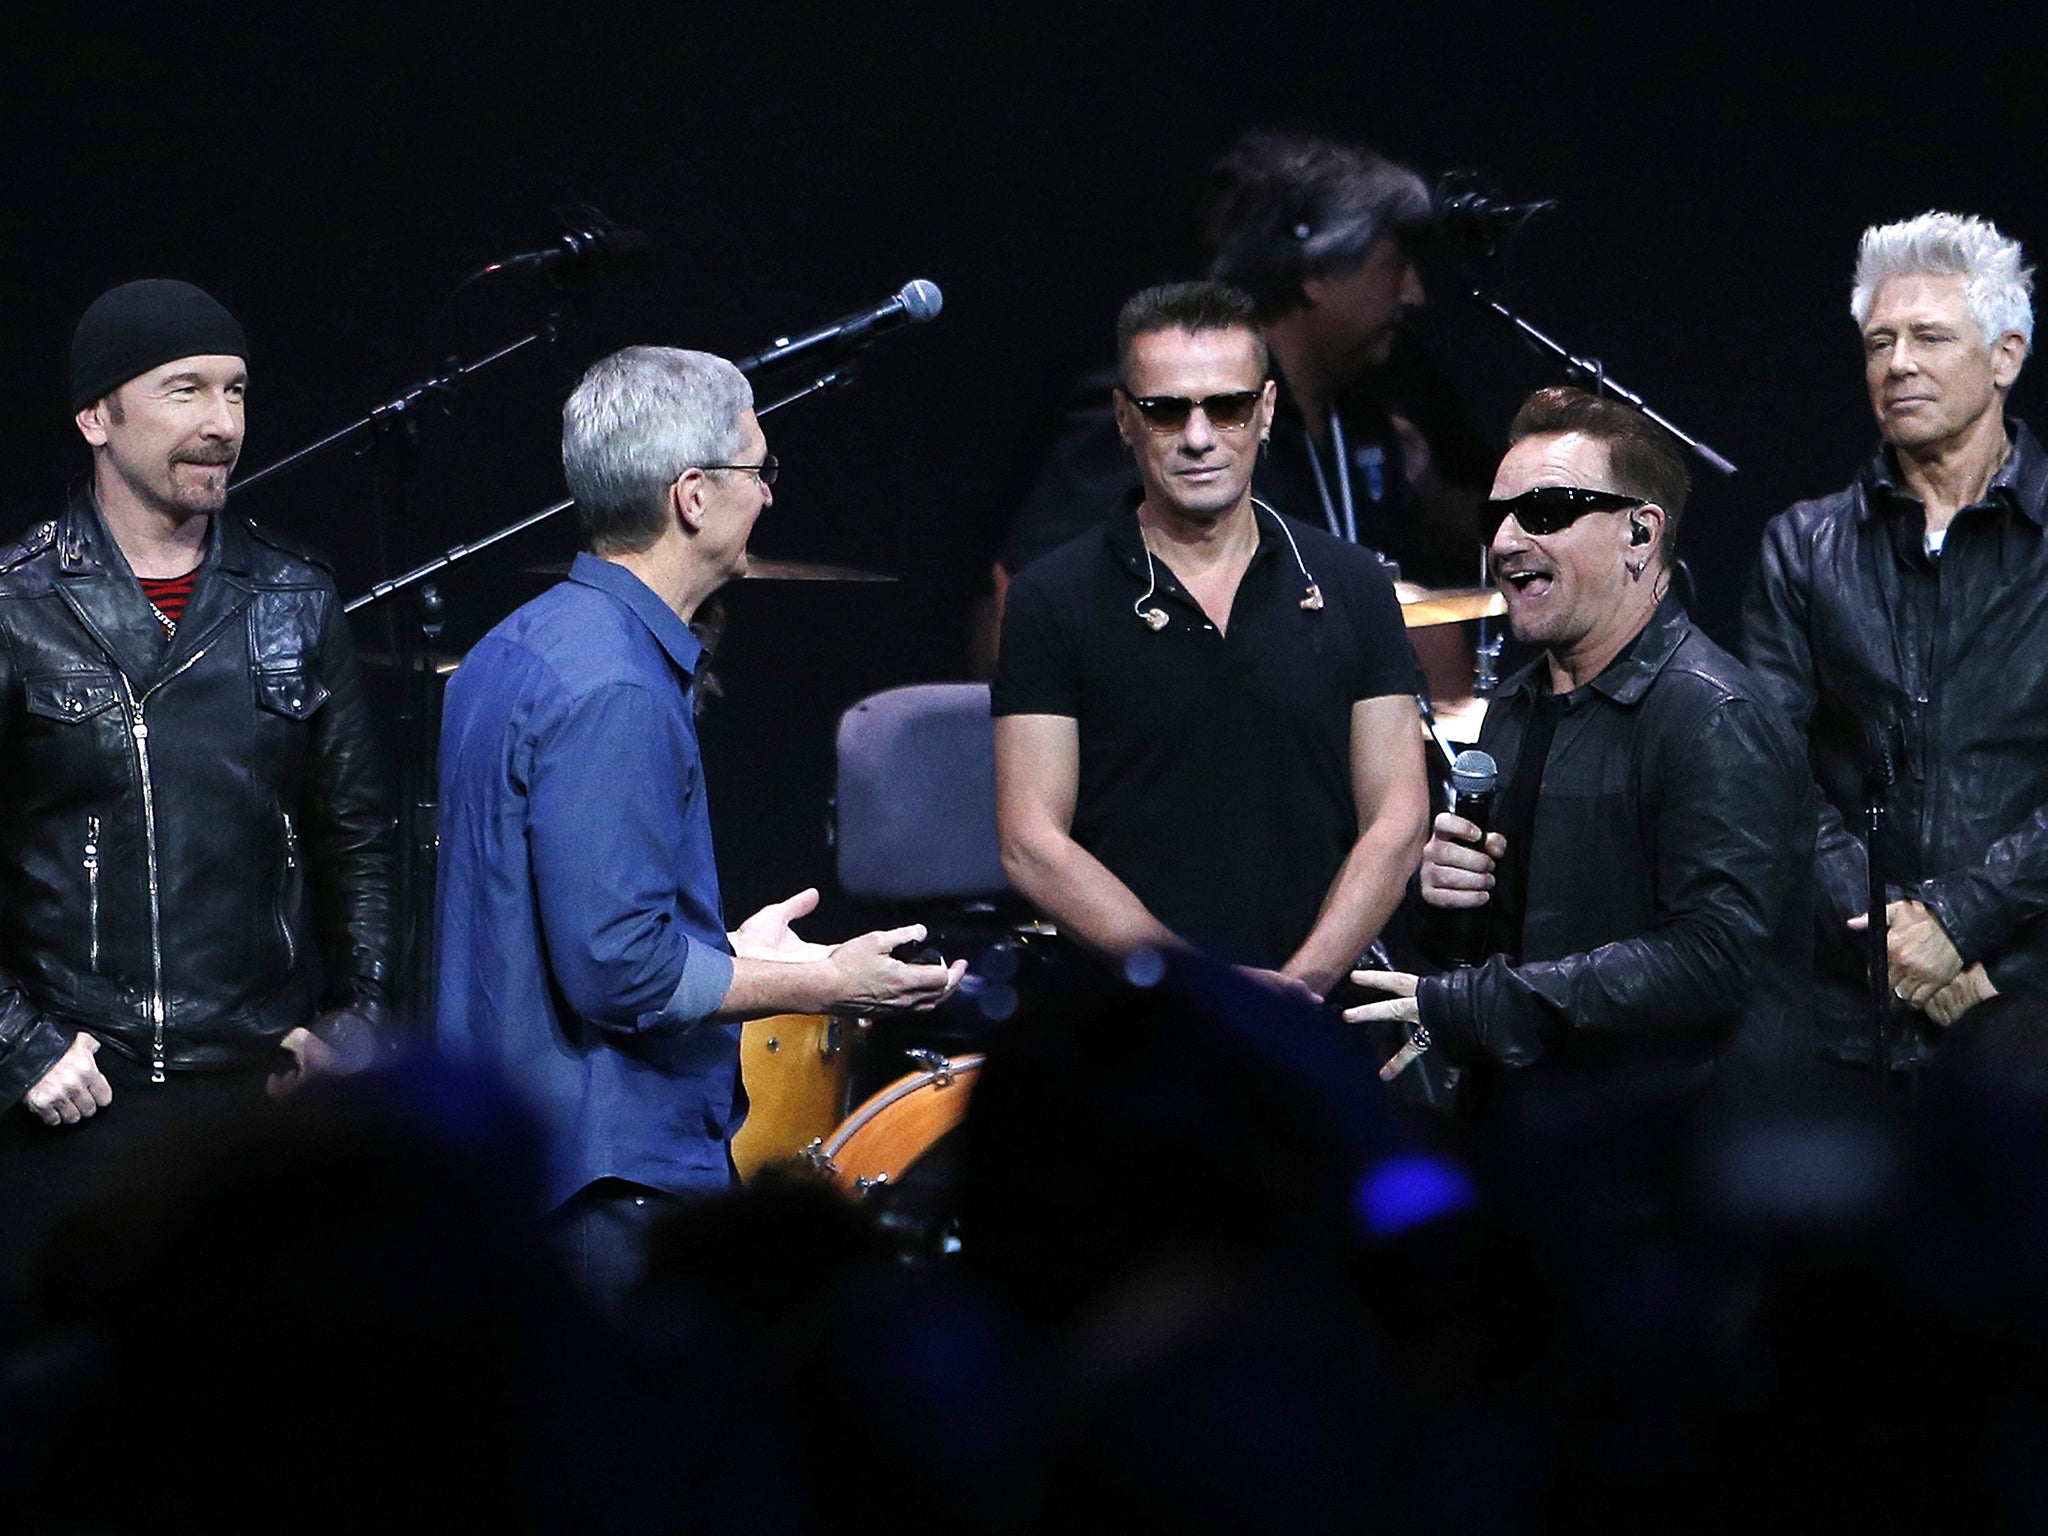 Apple chief Tim Cook (in blue shirt) with (from left) The Edge, Larry Mullen Jr, Bono
and Adam Clayton of U2 at the iPhone 6 launch